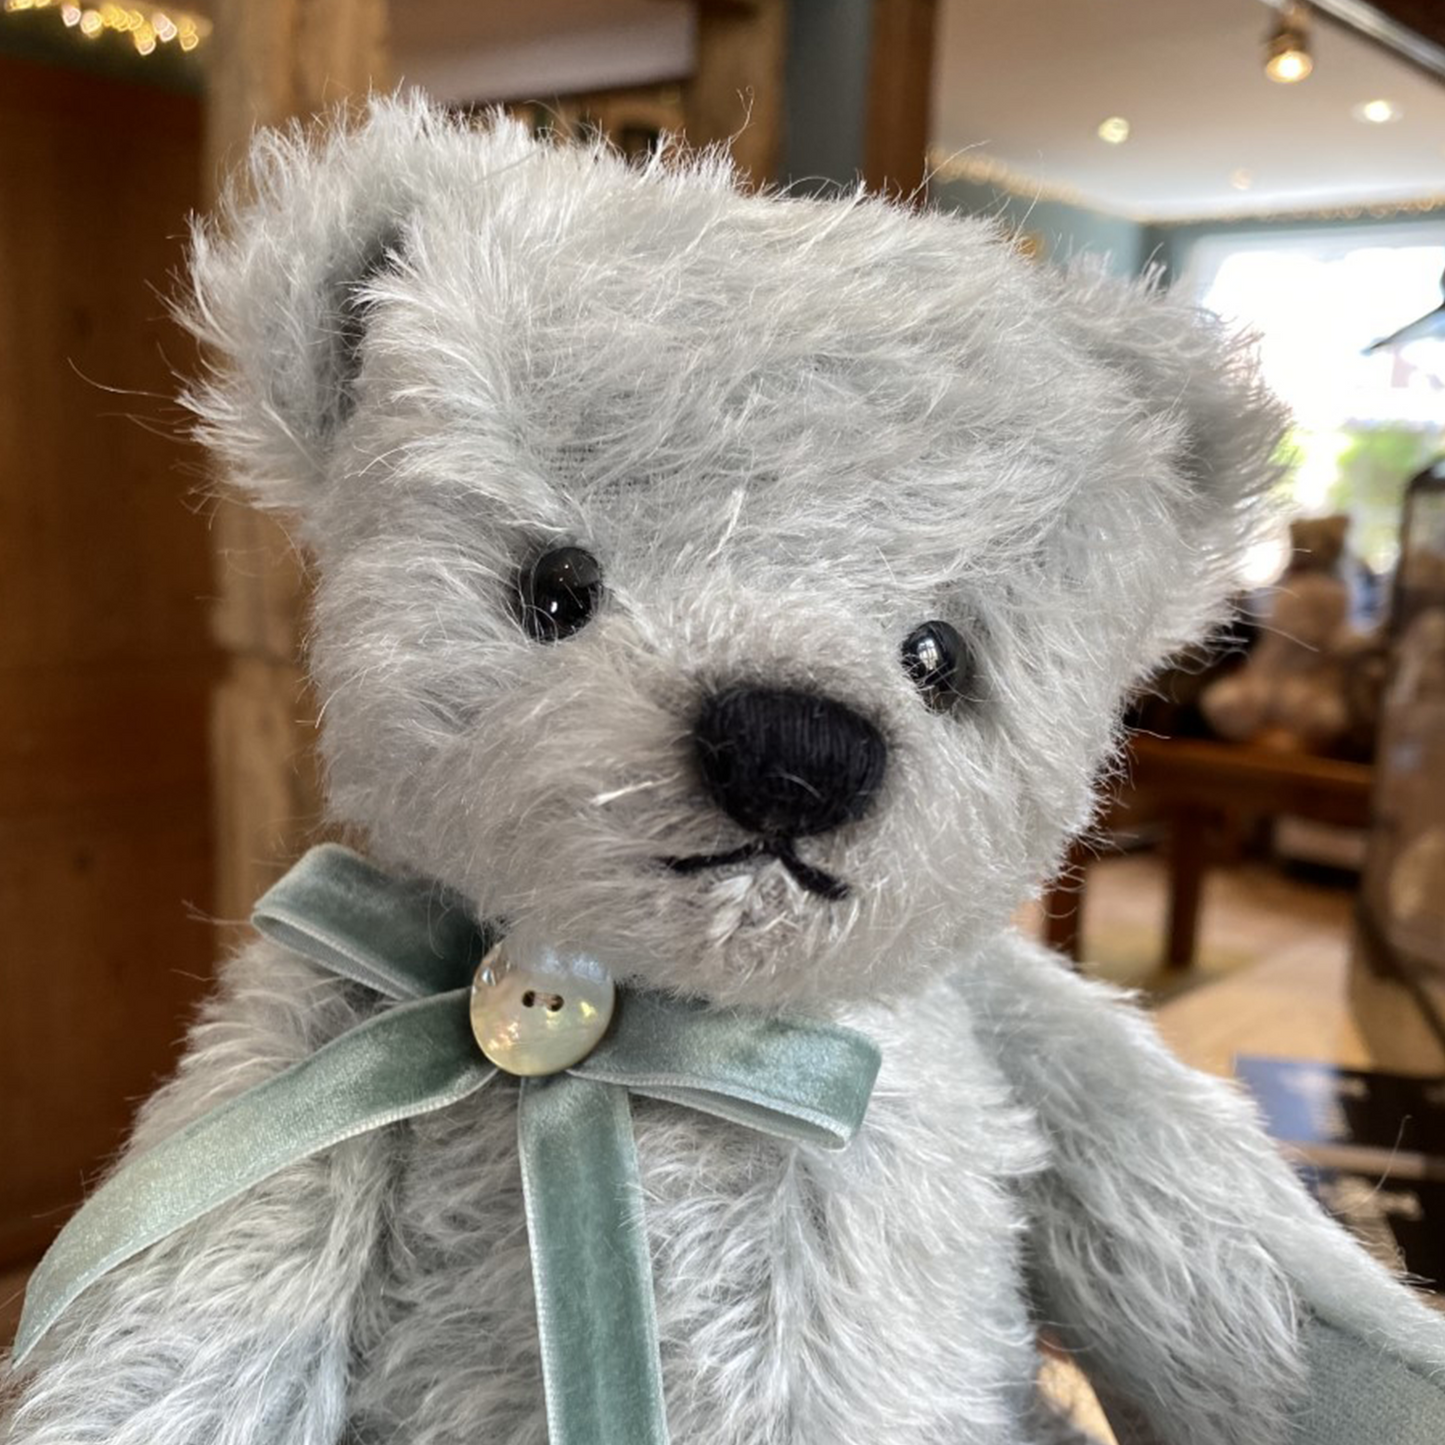 This absolutely stunning Teddy Bear from Teddy Hermann is crafted from the finest pale teal mohair and has a matching velvet ribbon bow around its neck which is finished with a mother of pearl button.  Limited to 200 pieces worldwide